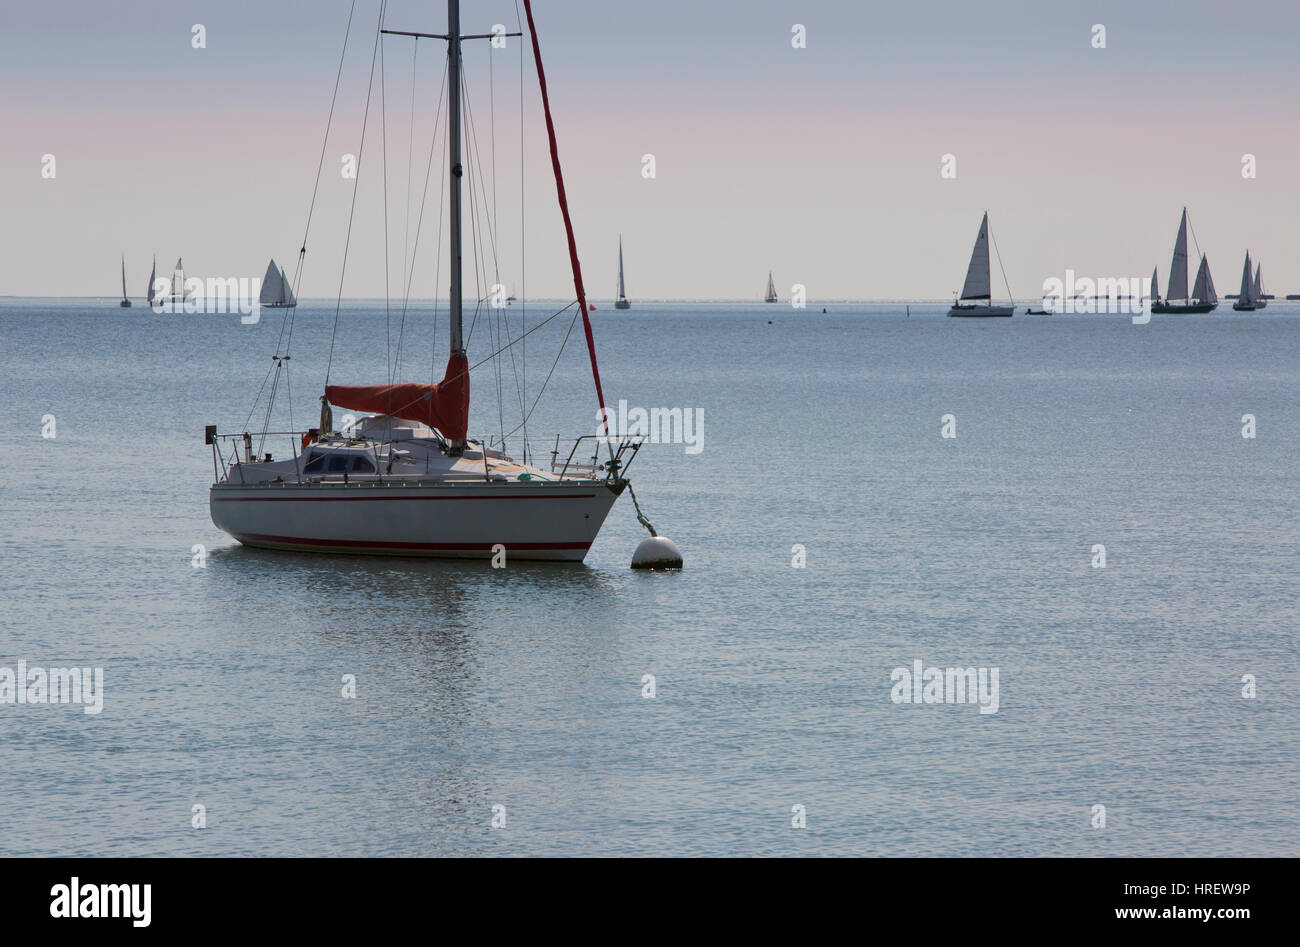 A sailing boat at its moorings with a yacht race in progress in the distance Stock Photo